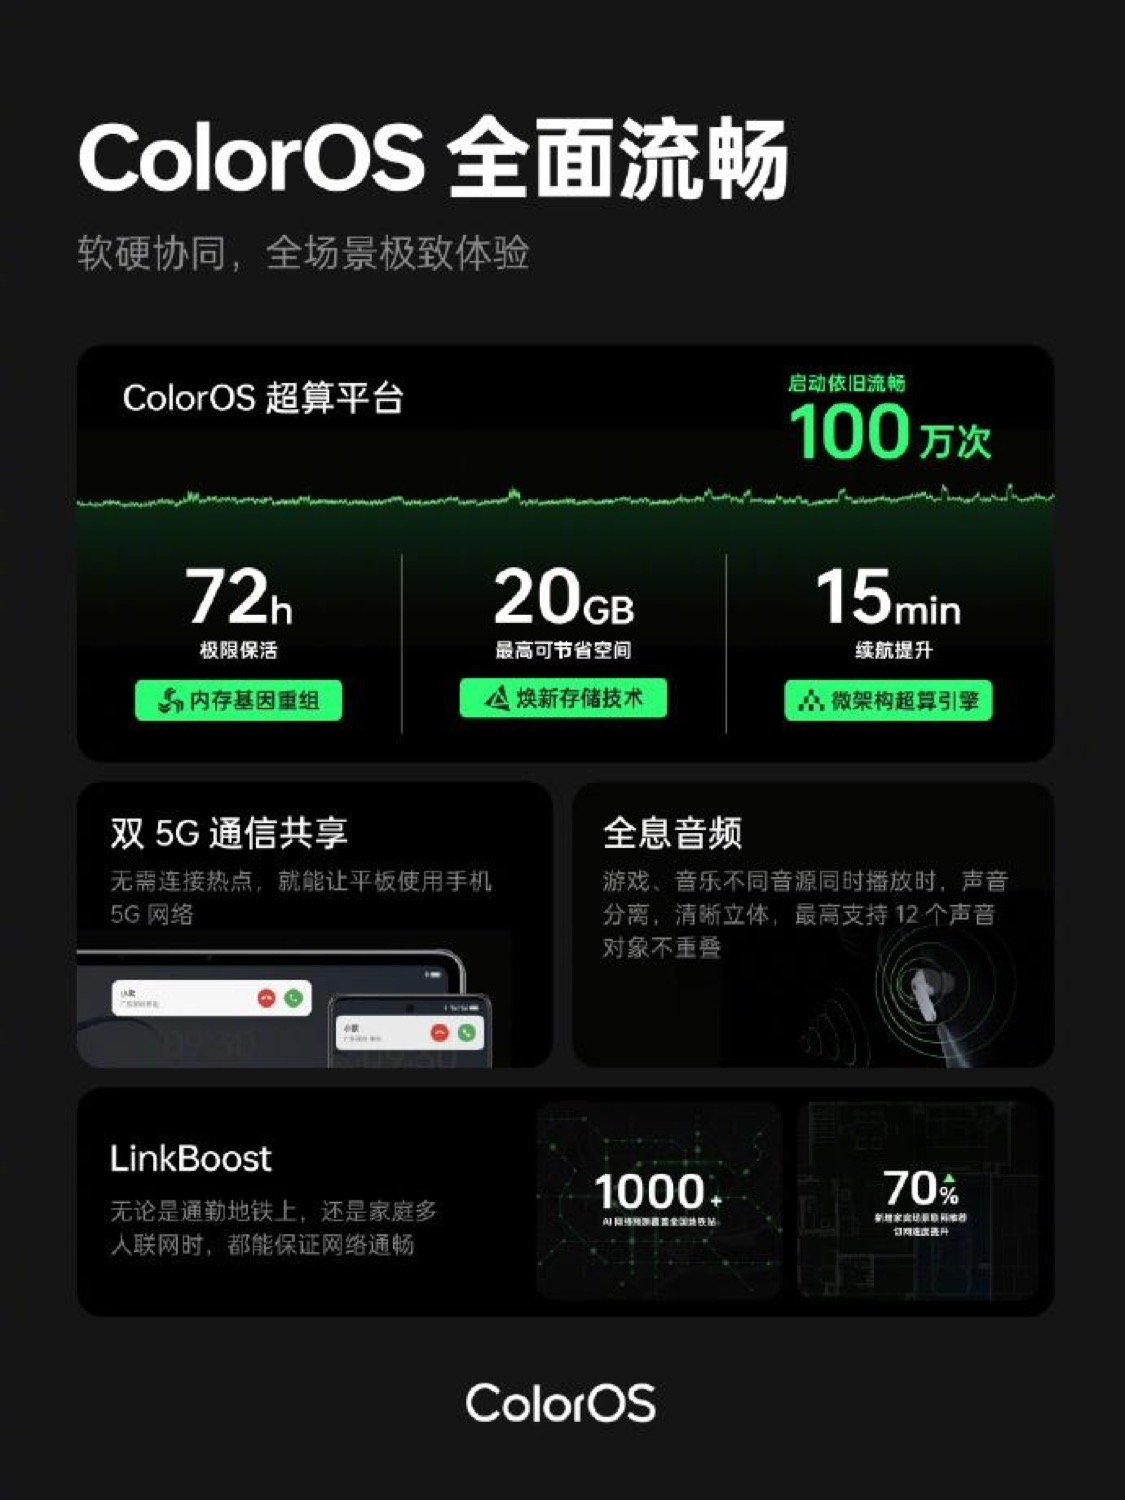 1700124754 802 Here is Oppo ColorOS 14 equipped with AI and inspired